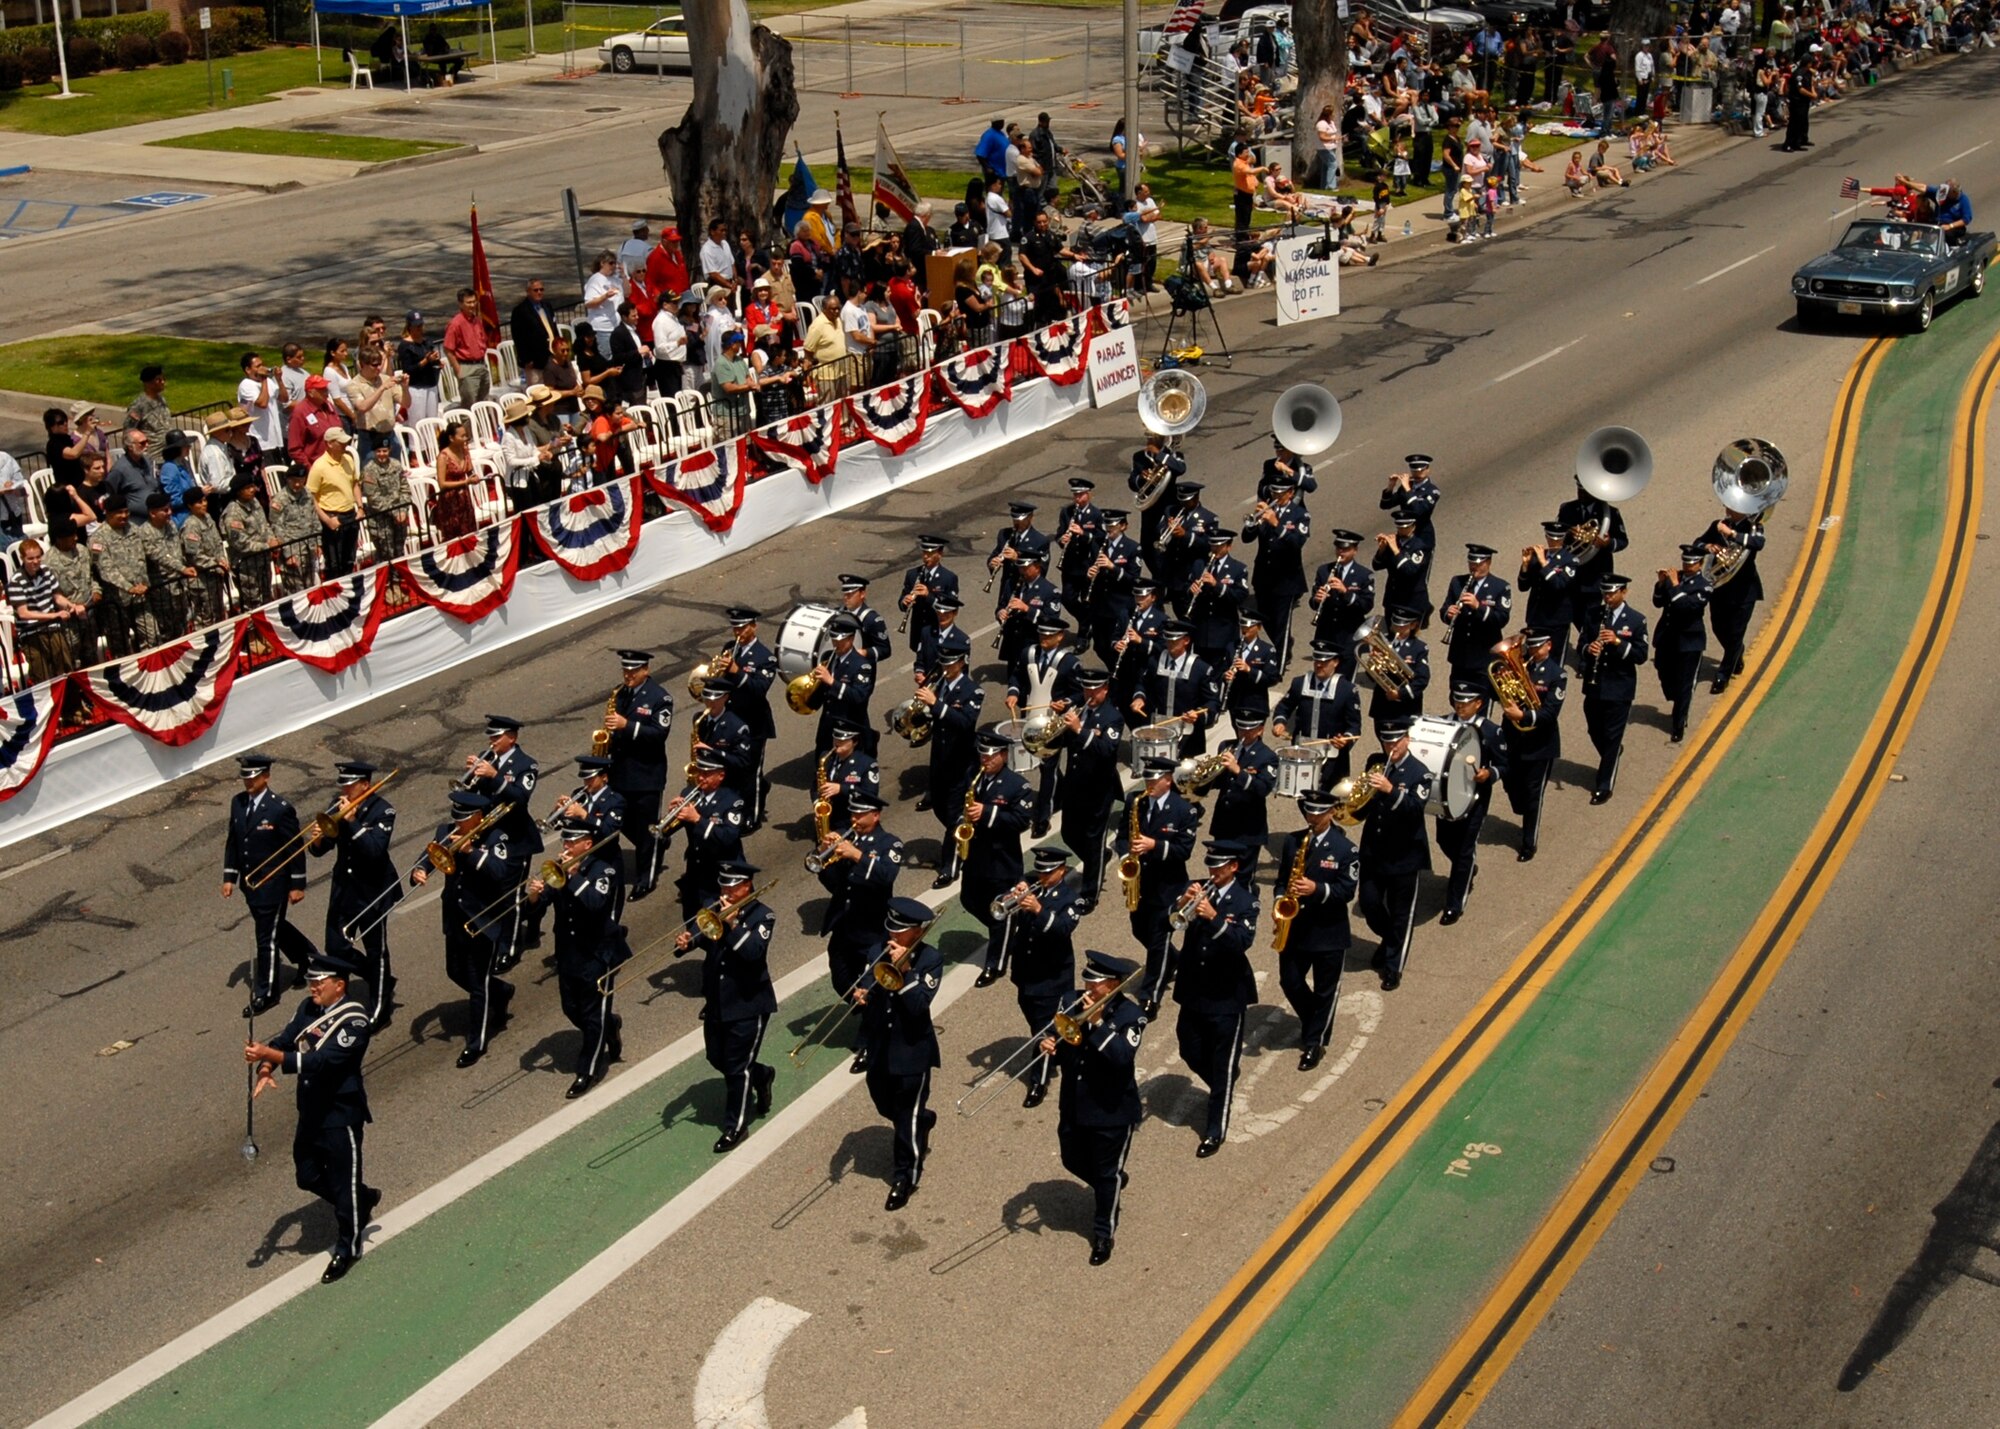 Members of the Band of the Golden West from Travis Air Force Base perform in the 2007 Torrance Armed Forces Day parade, May 19. Gen. Kevin Chilton, Air Force Space Command commander, served as the Grand Marshal for the parade. A Los Angeles AFB honor guard led the way as Los Angeles, Edwards, and Vandenberg Air Force Bases and March Air Reserve Base marched passed the crowds with a total of more than 300 airmen participating. 
